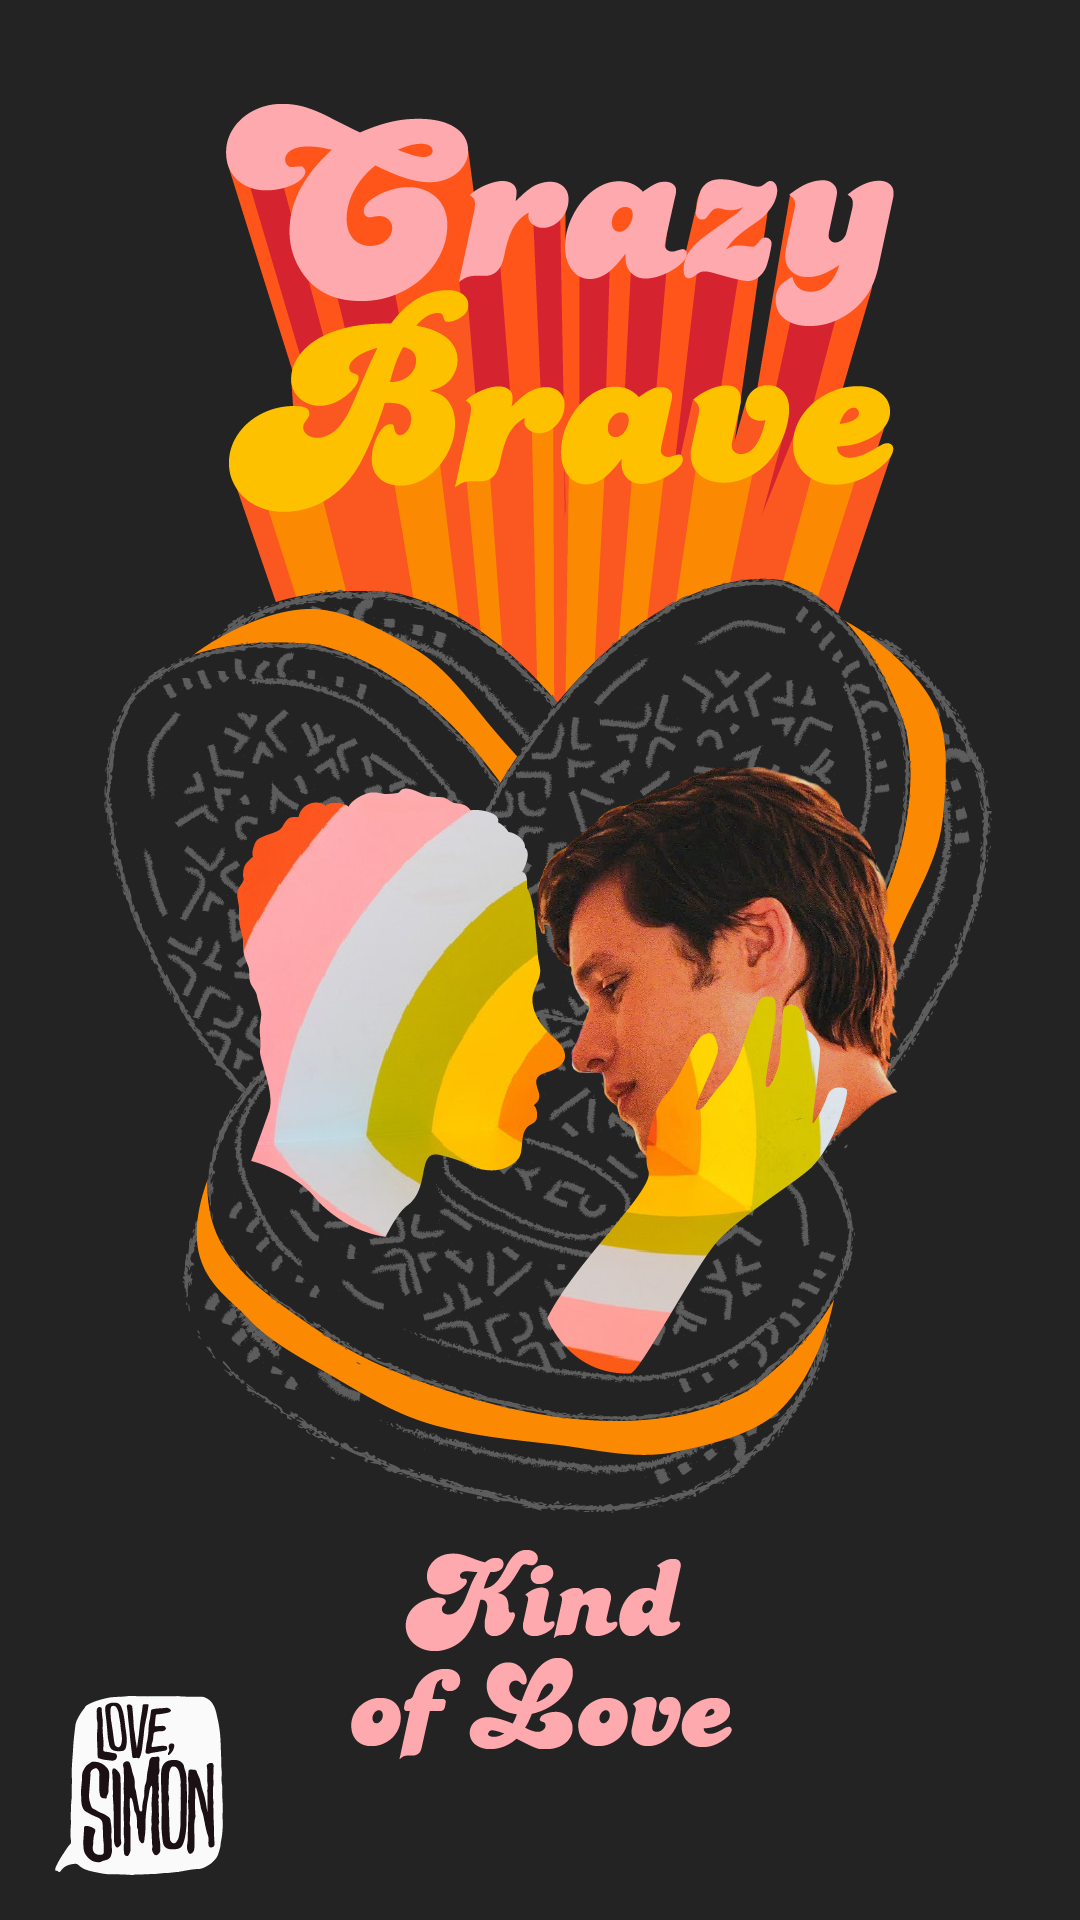 Everyone deserves Gimme More, Yes Please Kind of Love Love Simon Wallpaper for phone by Hoodzpah